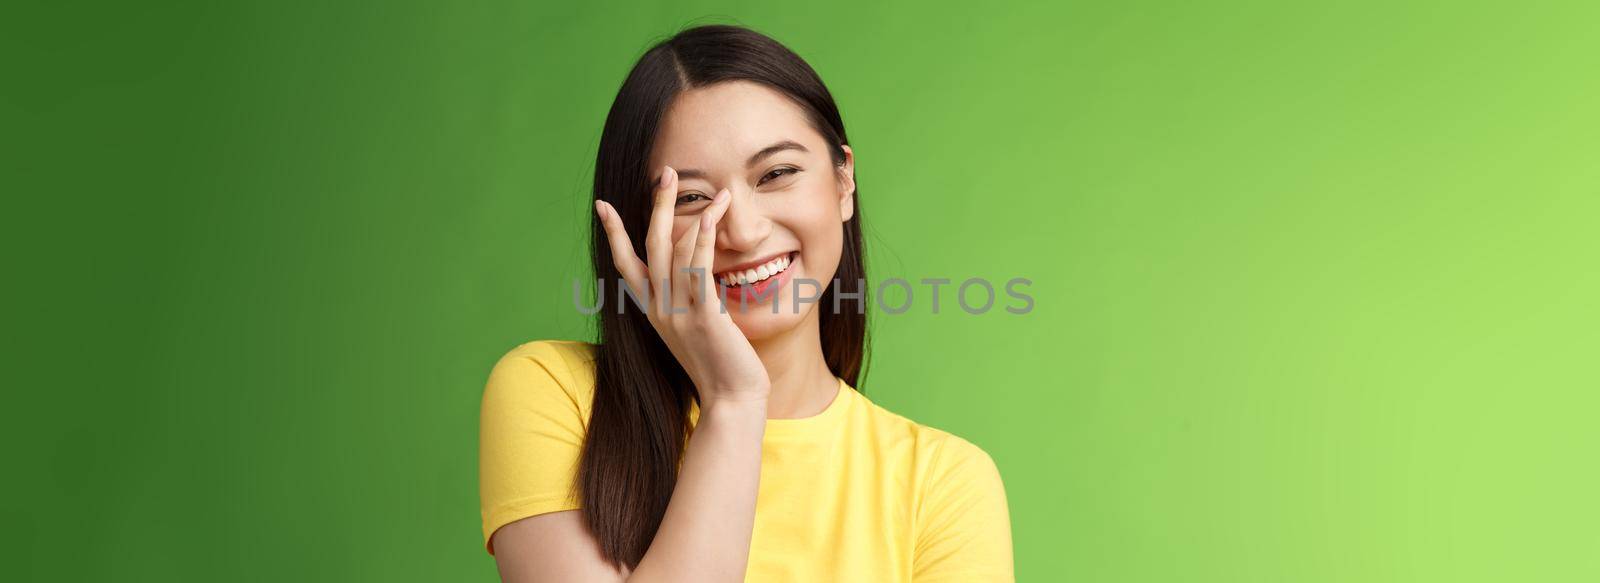 Waist-up sincere happy cheerful tender feminine asian woman brunette, laughing carefree smiling, enjoy entertaining company, giggle, touch face shy blushing cute compliments, gree background.